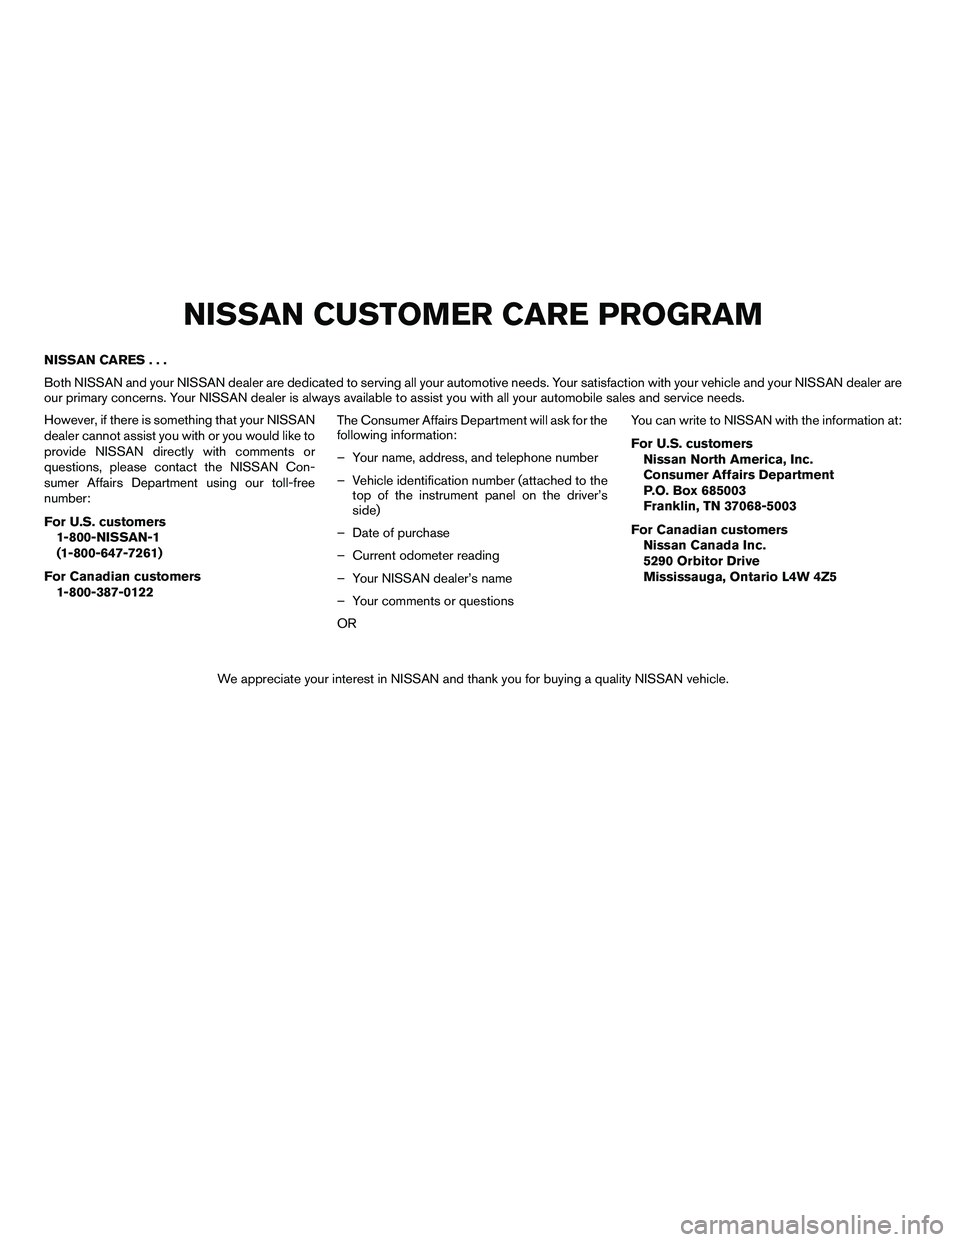 NISSAN ARMADA 2010  Owners Manual NISSAN CARES...
Both NISSAN and your NISSAN dealer are dedicated to serving all your automotive needs. Your satisfaction with your vehicle and your NISSAN dealer are
our primary concerns. Your NISSAN 